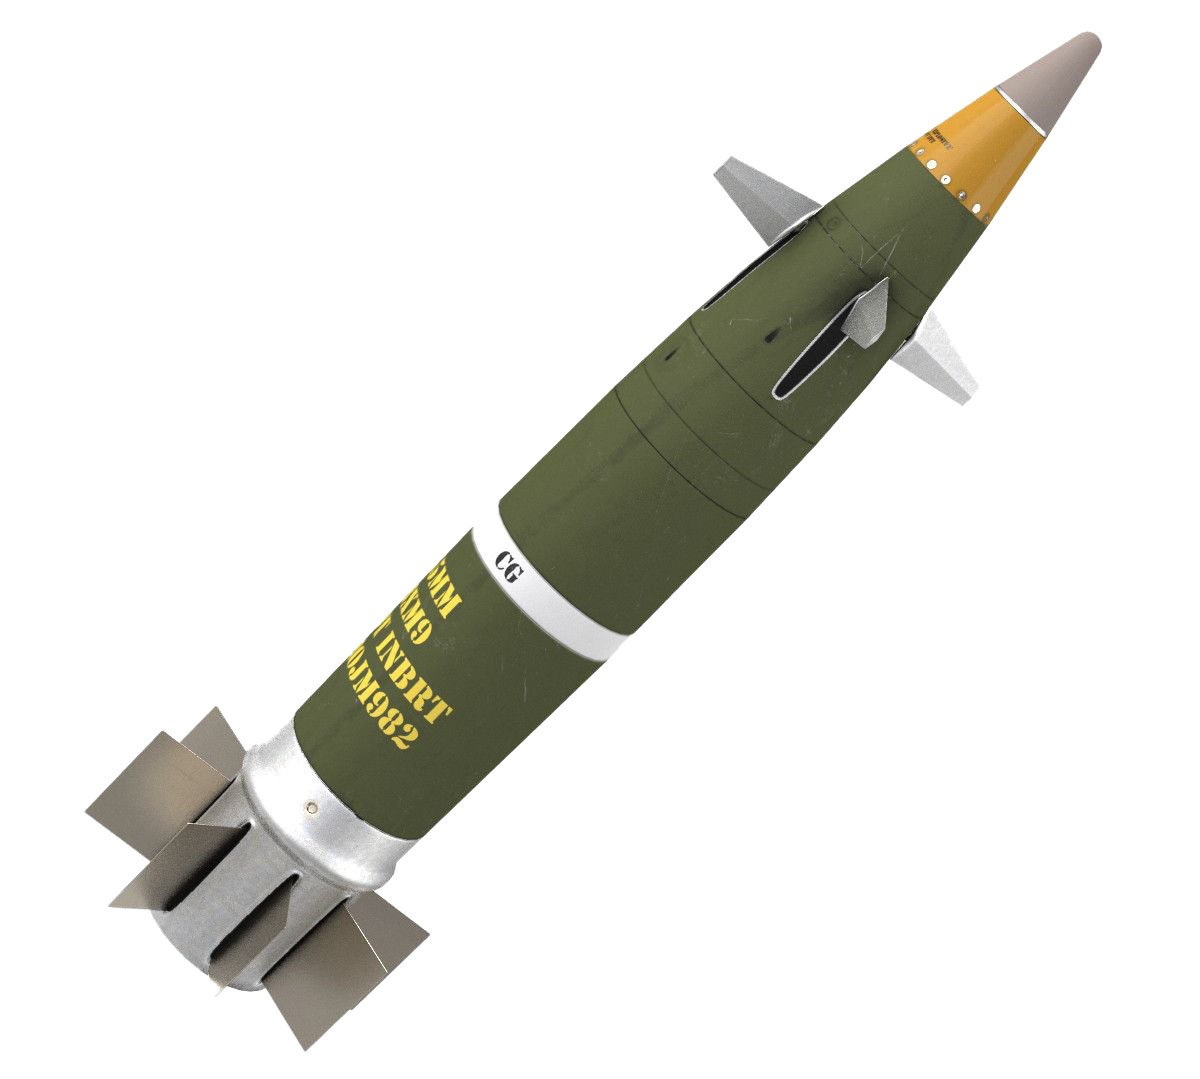 M982 Excalibur for the Armed Forces: guided high-precision projectile - a "present" for the ruscists